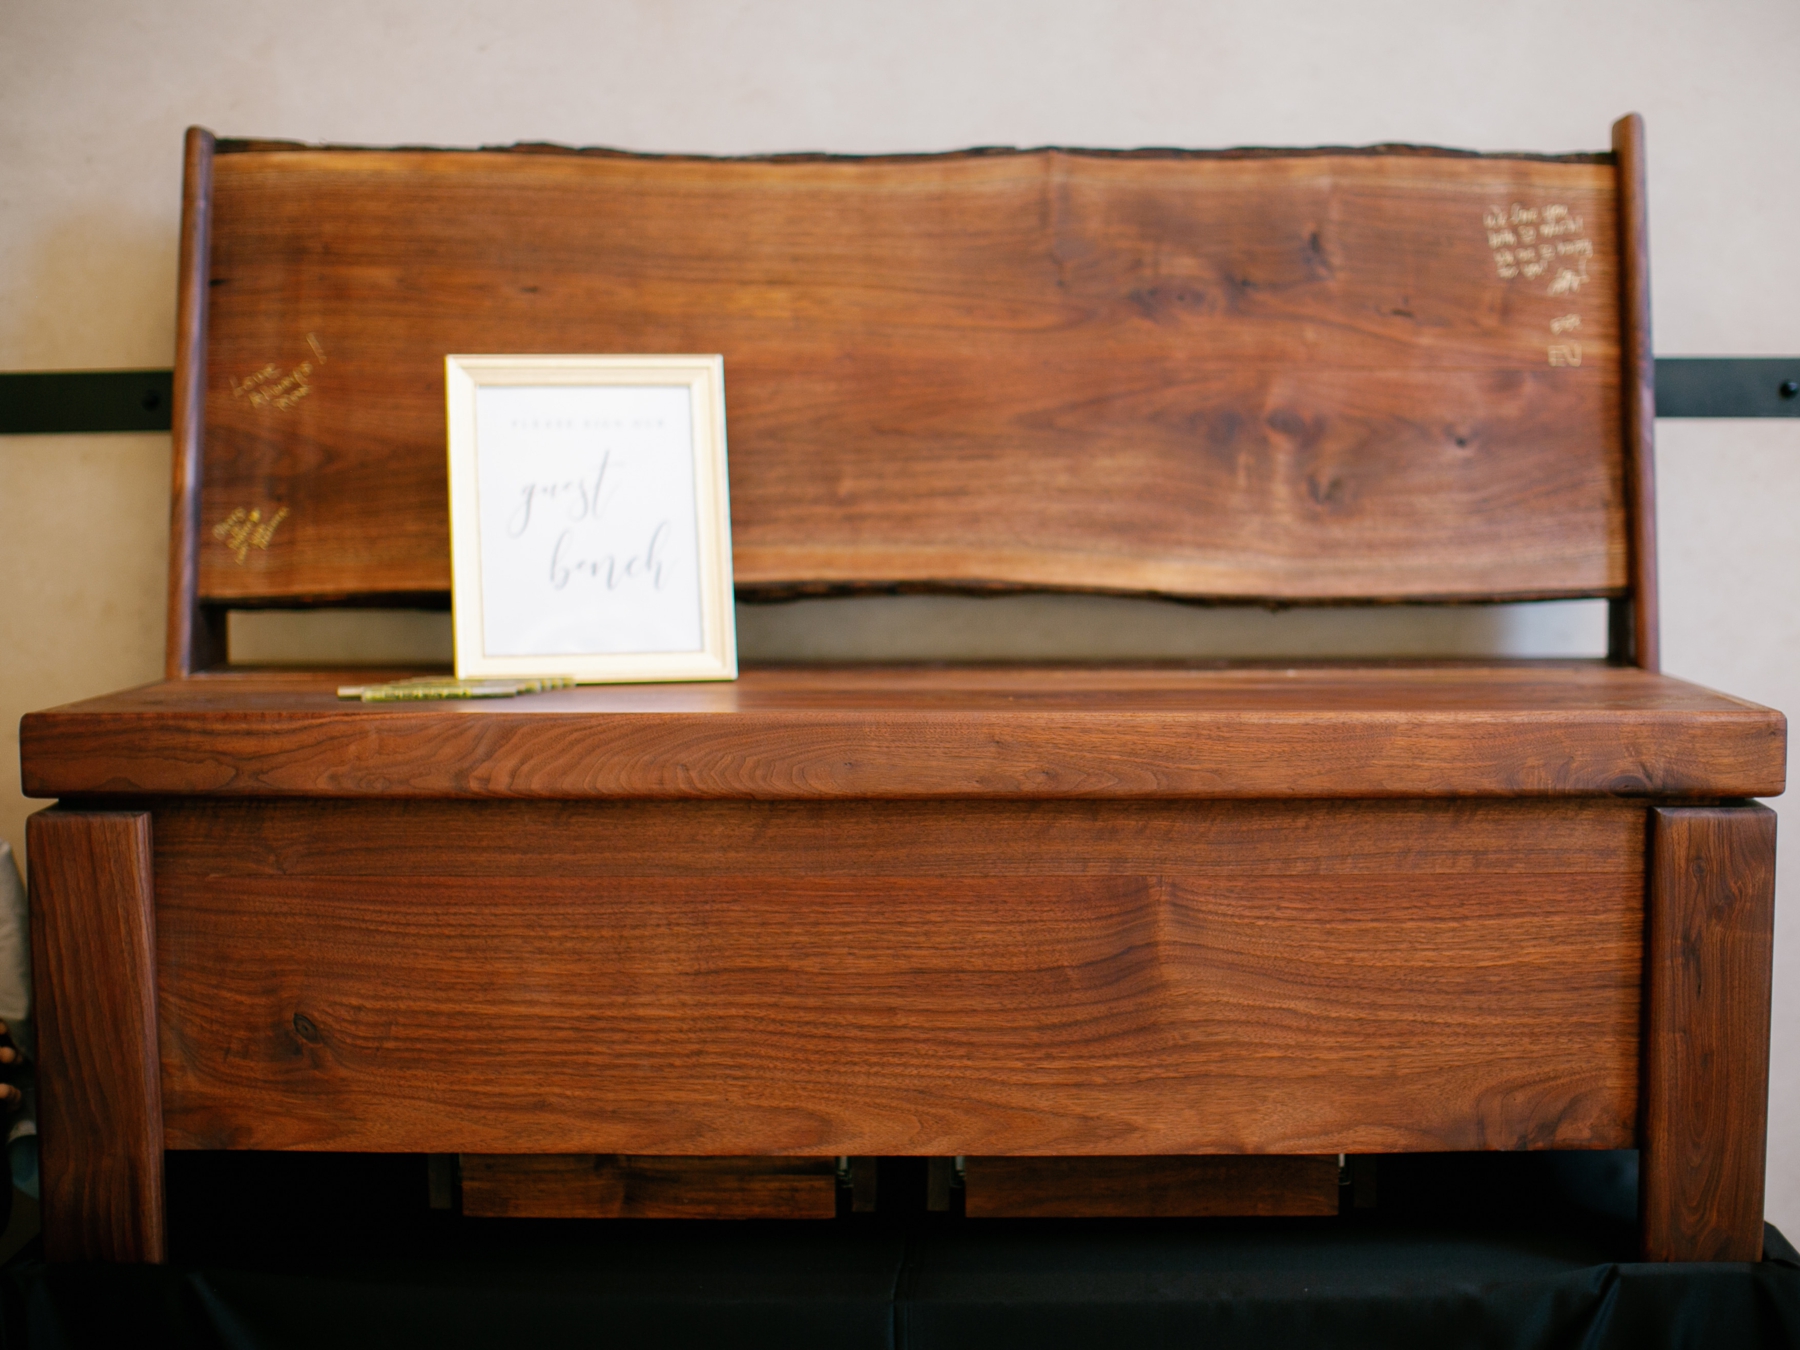 Wooden bench used as wedding guest book